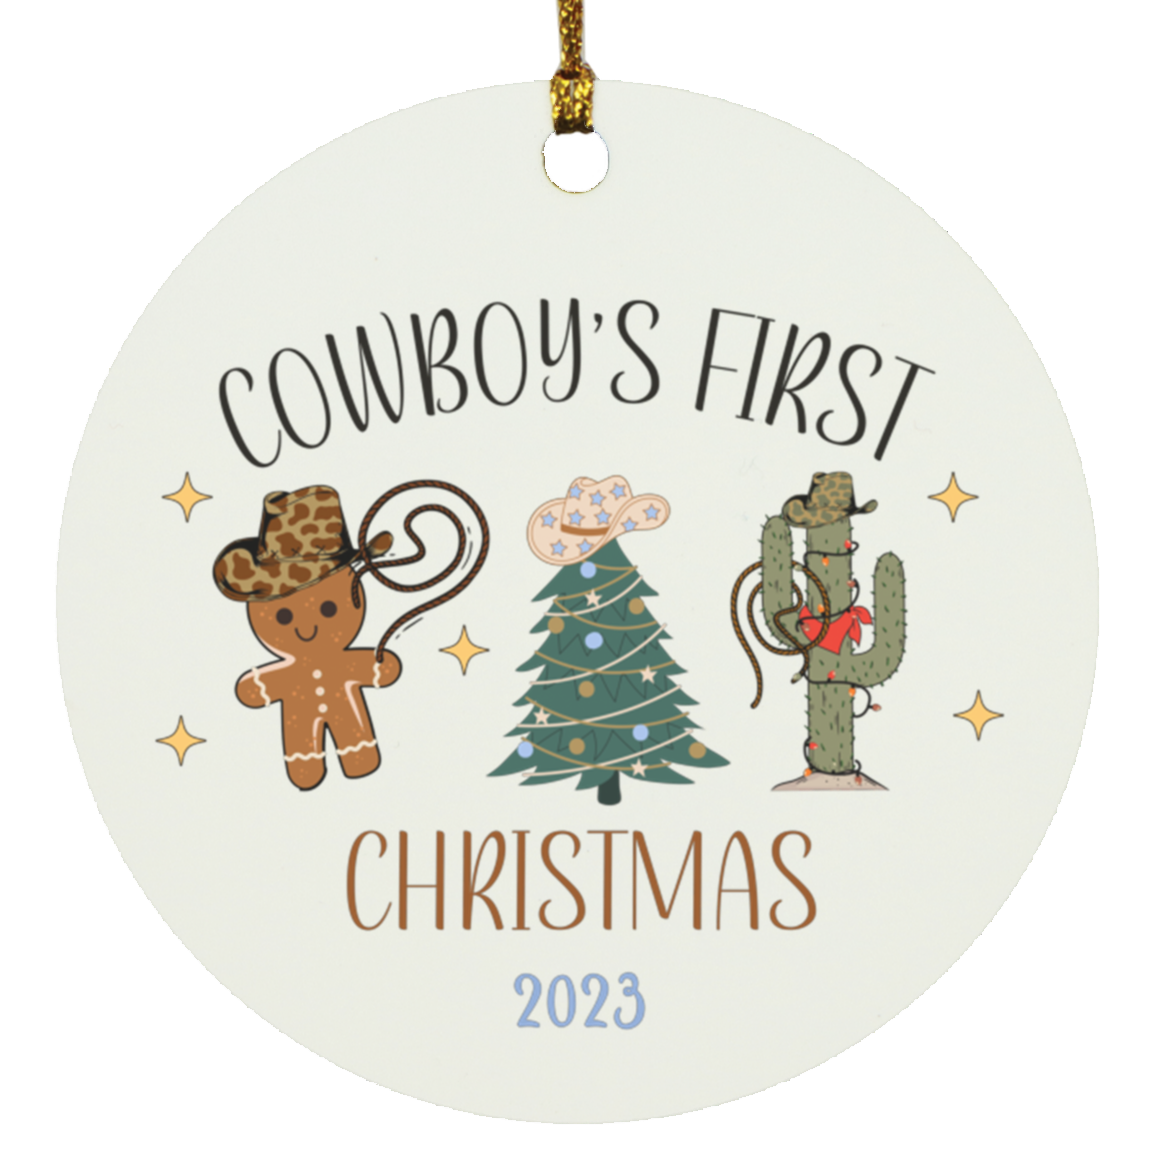 Cowboy's First Christmas (2023)- Wooden Circle Ornament